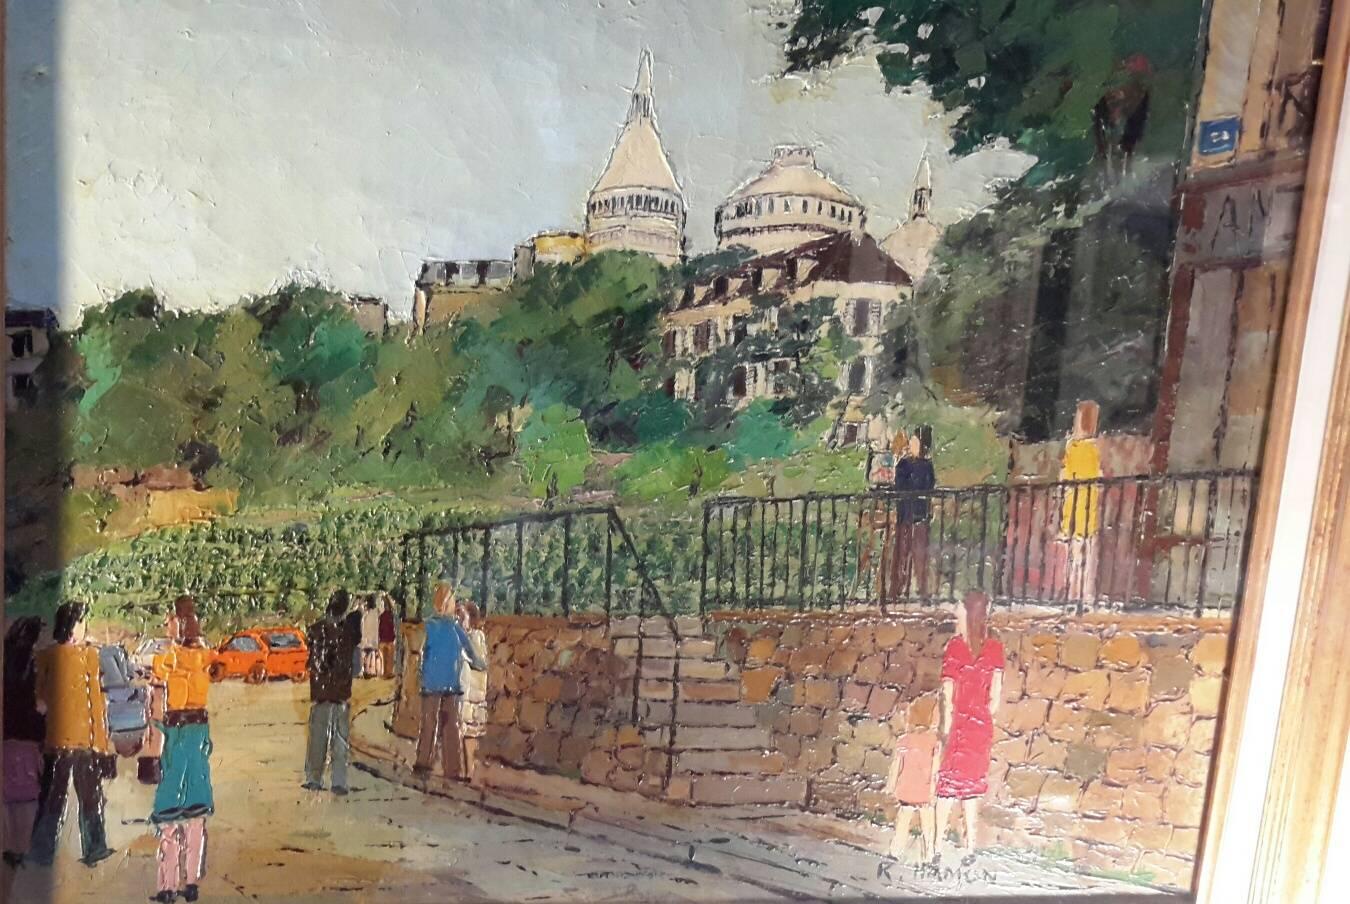 Paris Vyneards in Montmartre - Post-Impressionist Painting by Roland Hamon